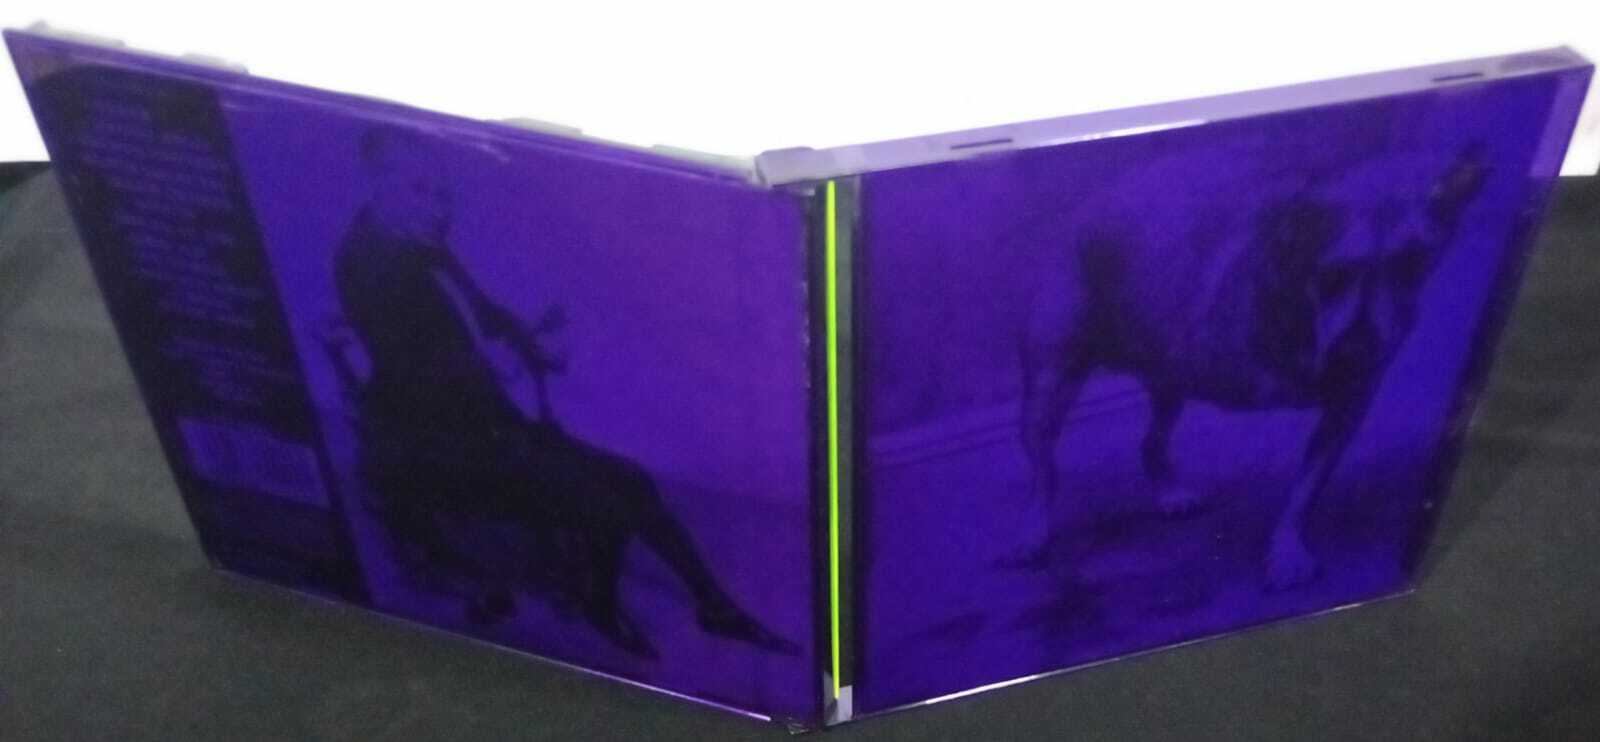 CD - Alice in Chains - 1995 (acrílico roxo)